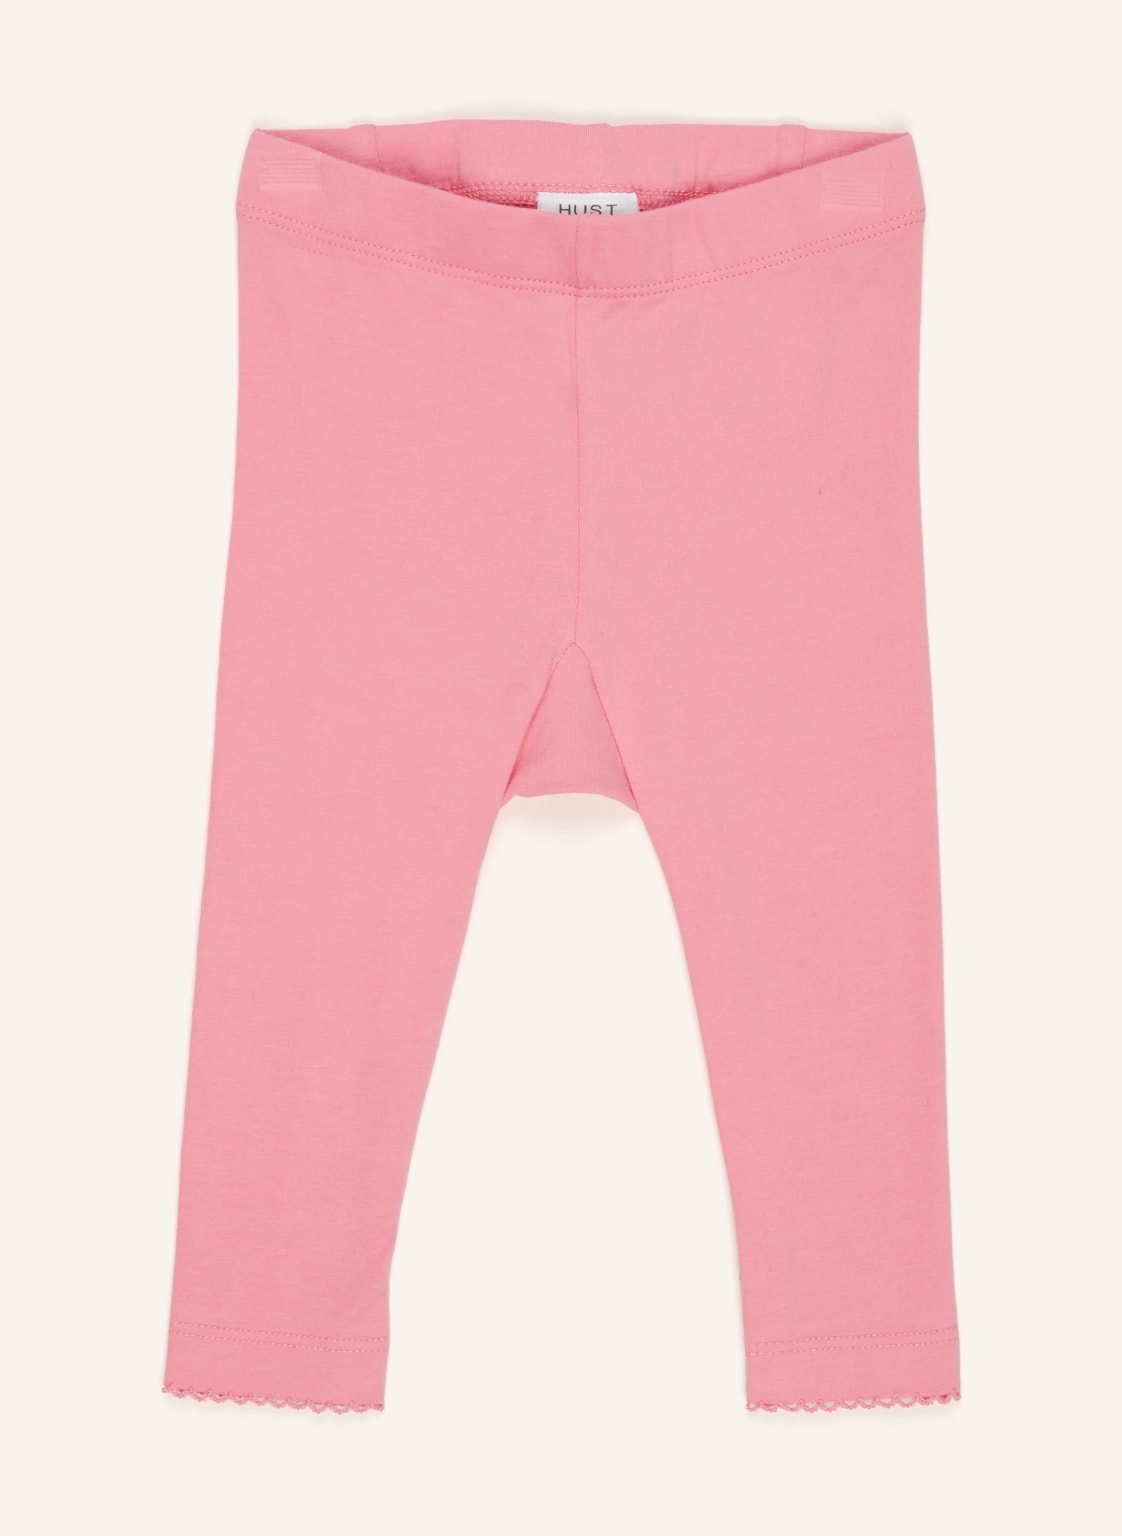 Hust And Claire Leggings Laline pink von HUST and CLAIRE